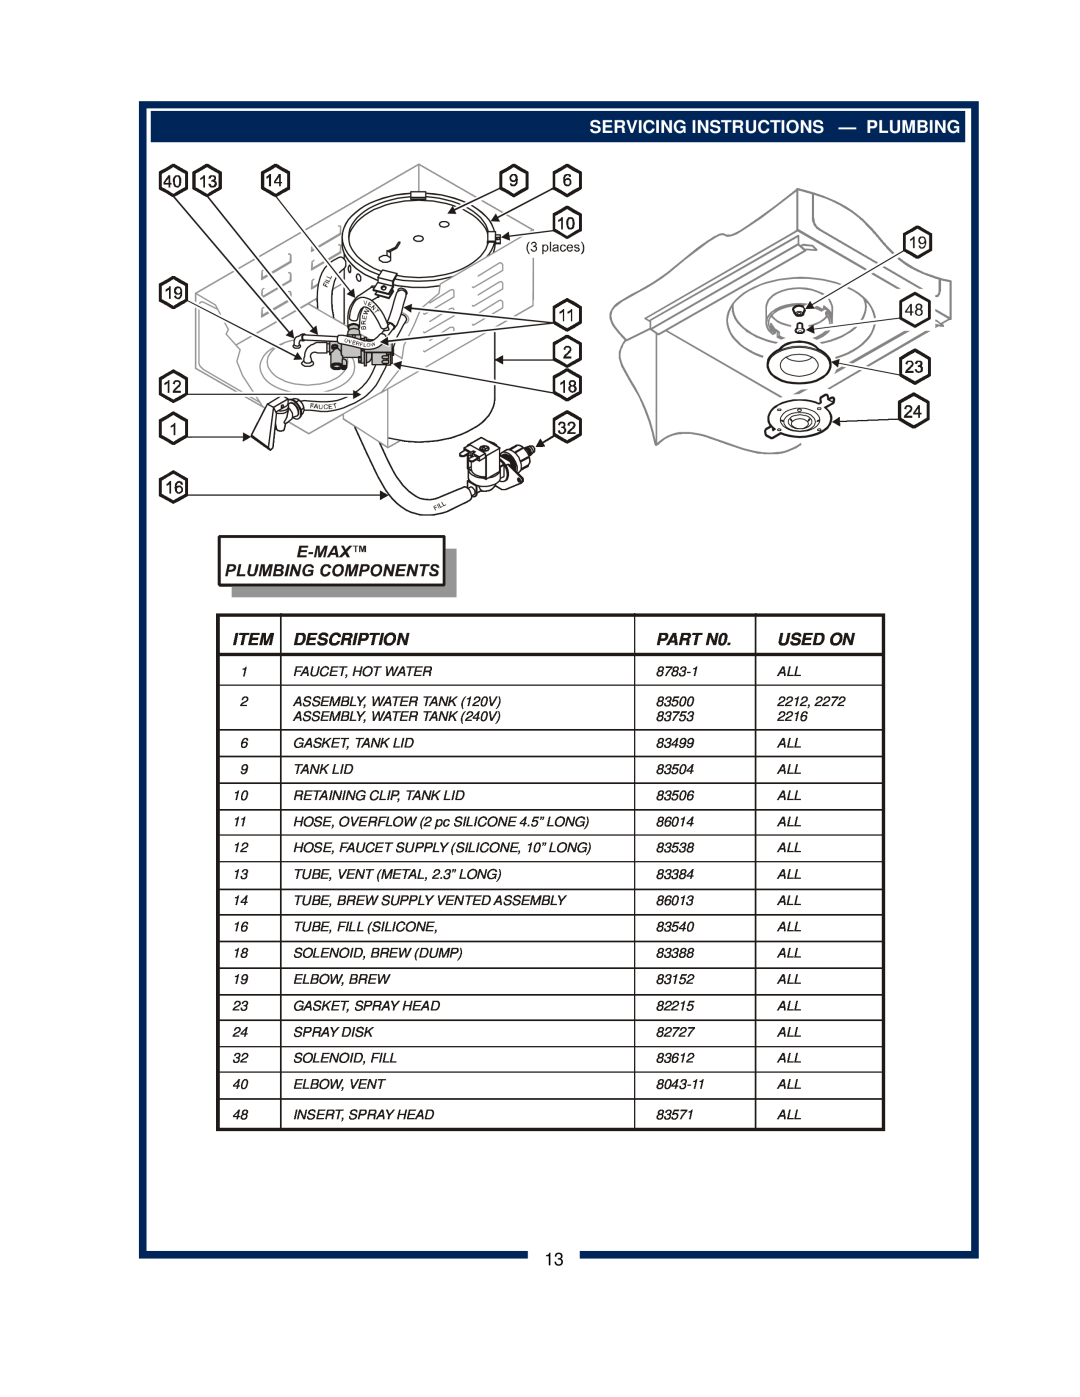 Bloomfield 2216EX, 2274EX, 2212, 2272 owner manual Servicing Instructions - Plumbing, Description, PART N0, Used On 